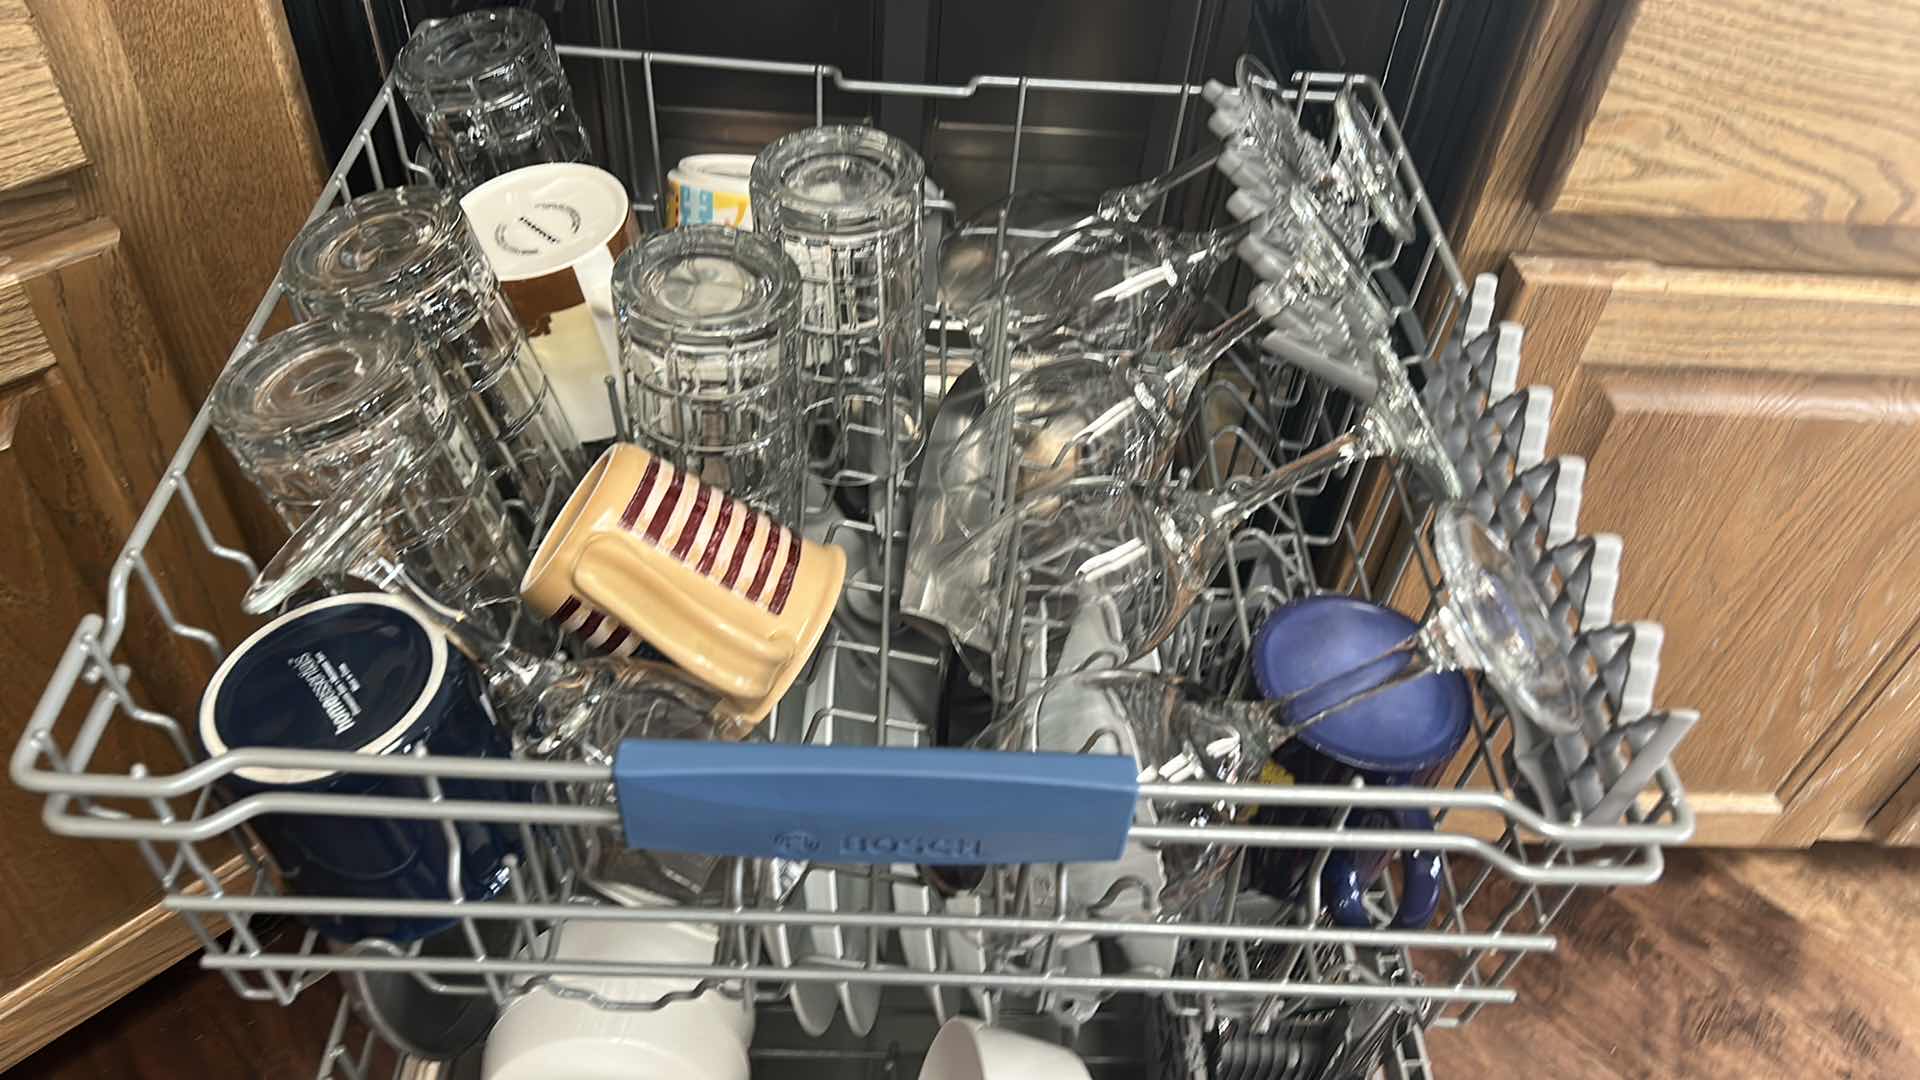 Photo 2 of CONTENTS OF DISHWASHER